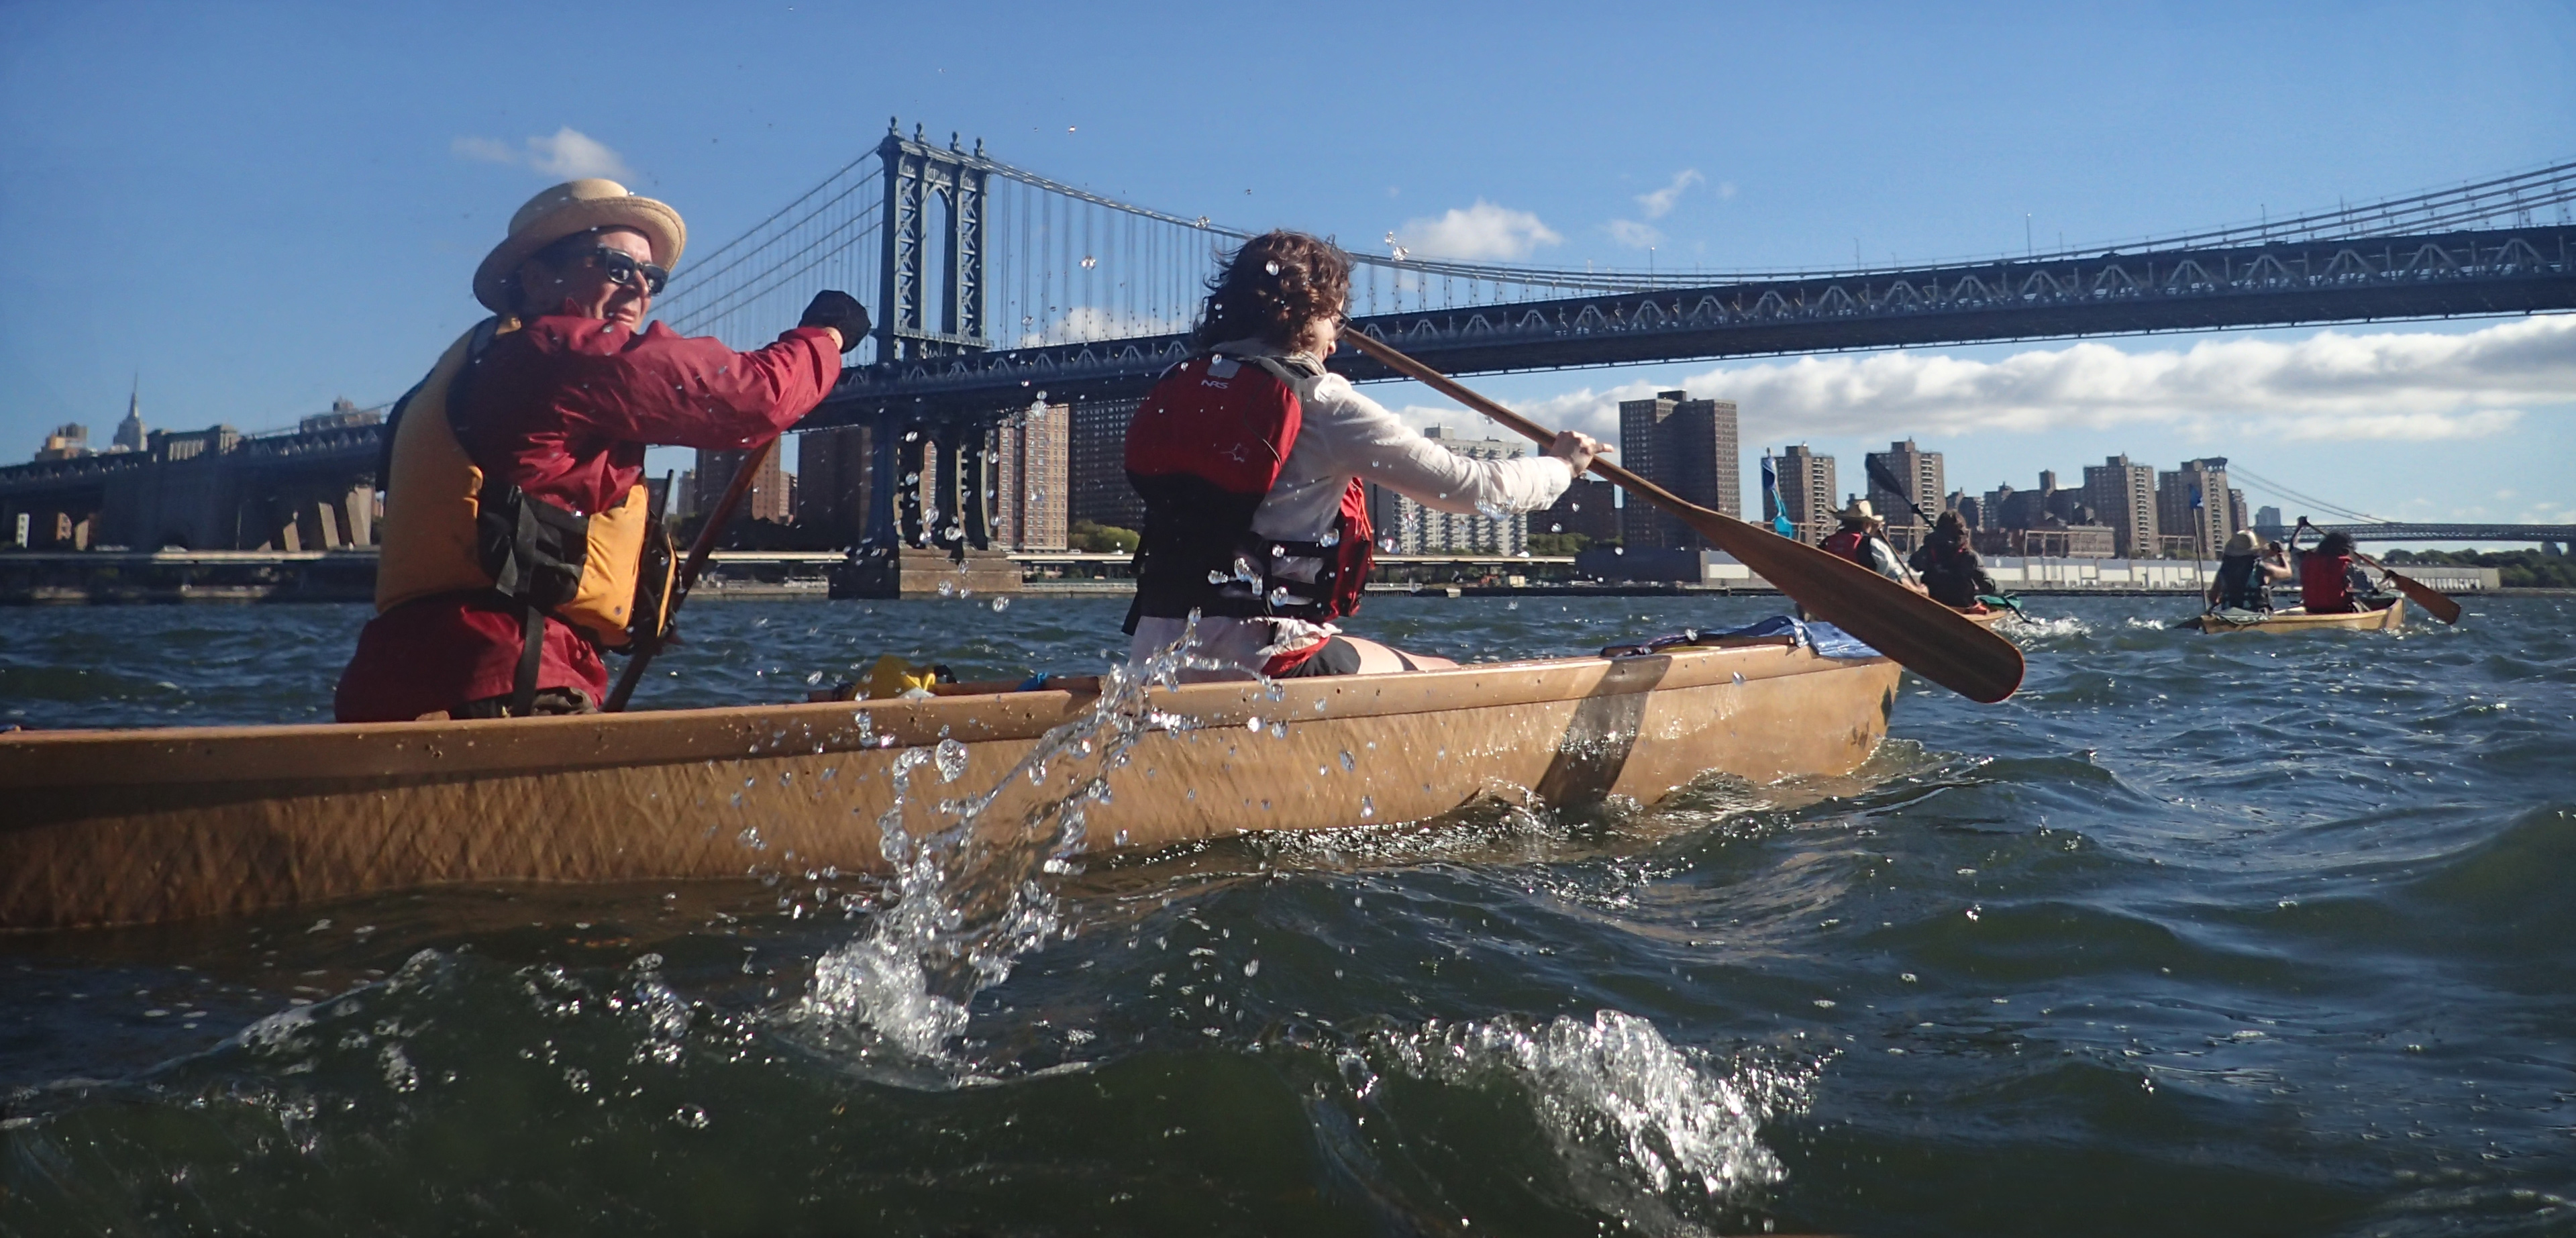 In 2014, members of Mare Liberum circumnavigated Manhattan in paper canoes to raise awareness of climate change. Photo by Sunita Prasad